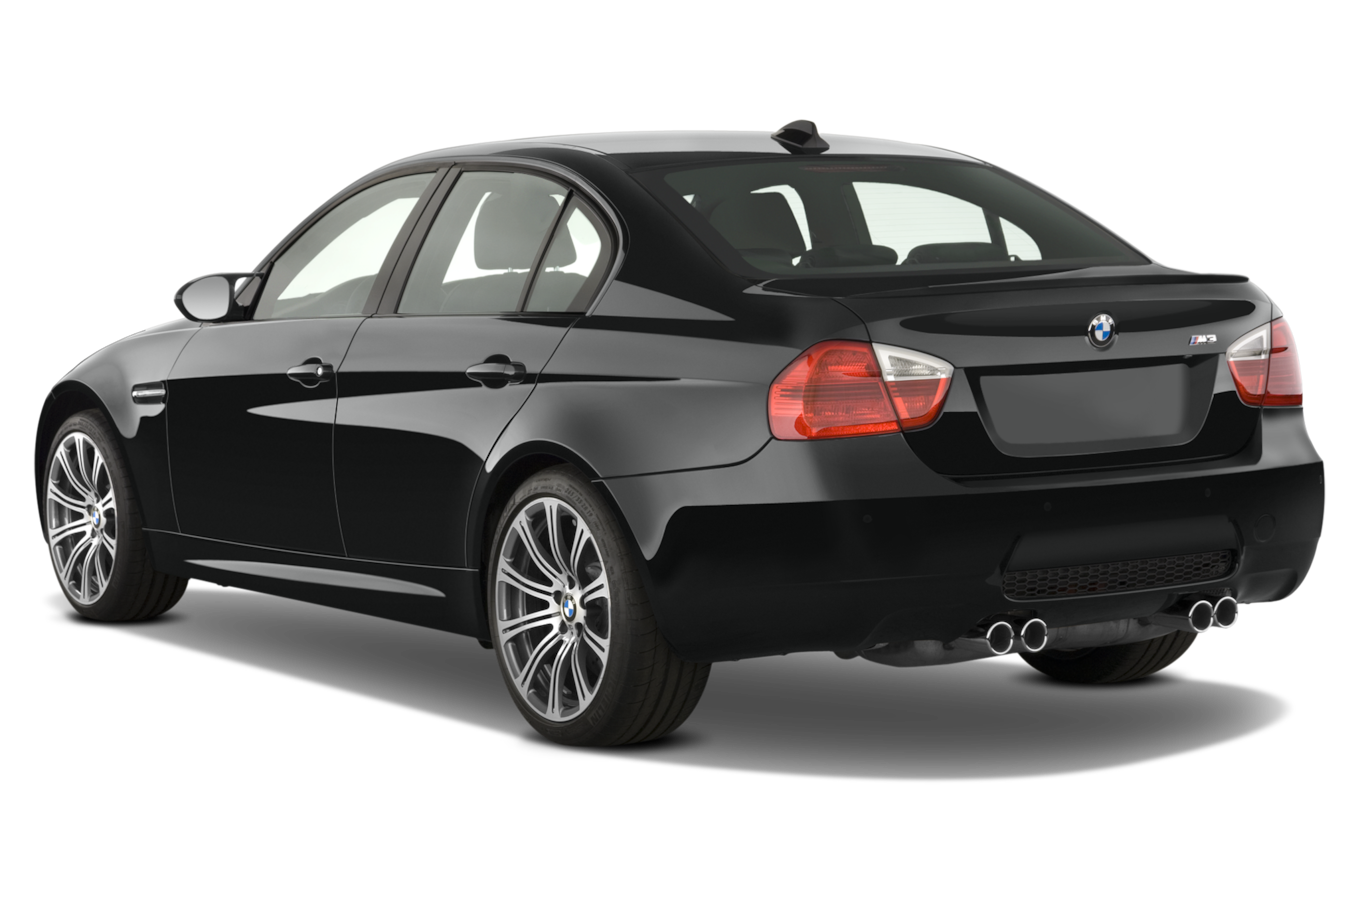 2010 bmw 335i coupe review